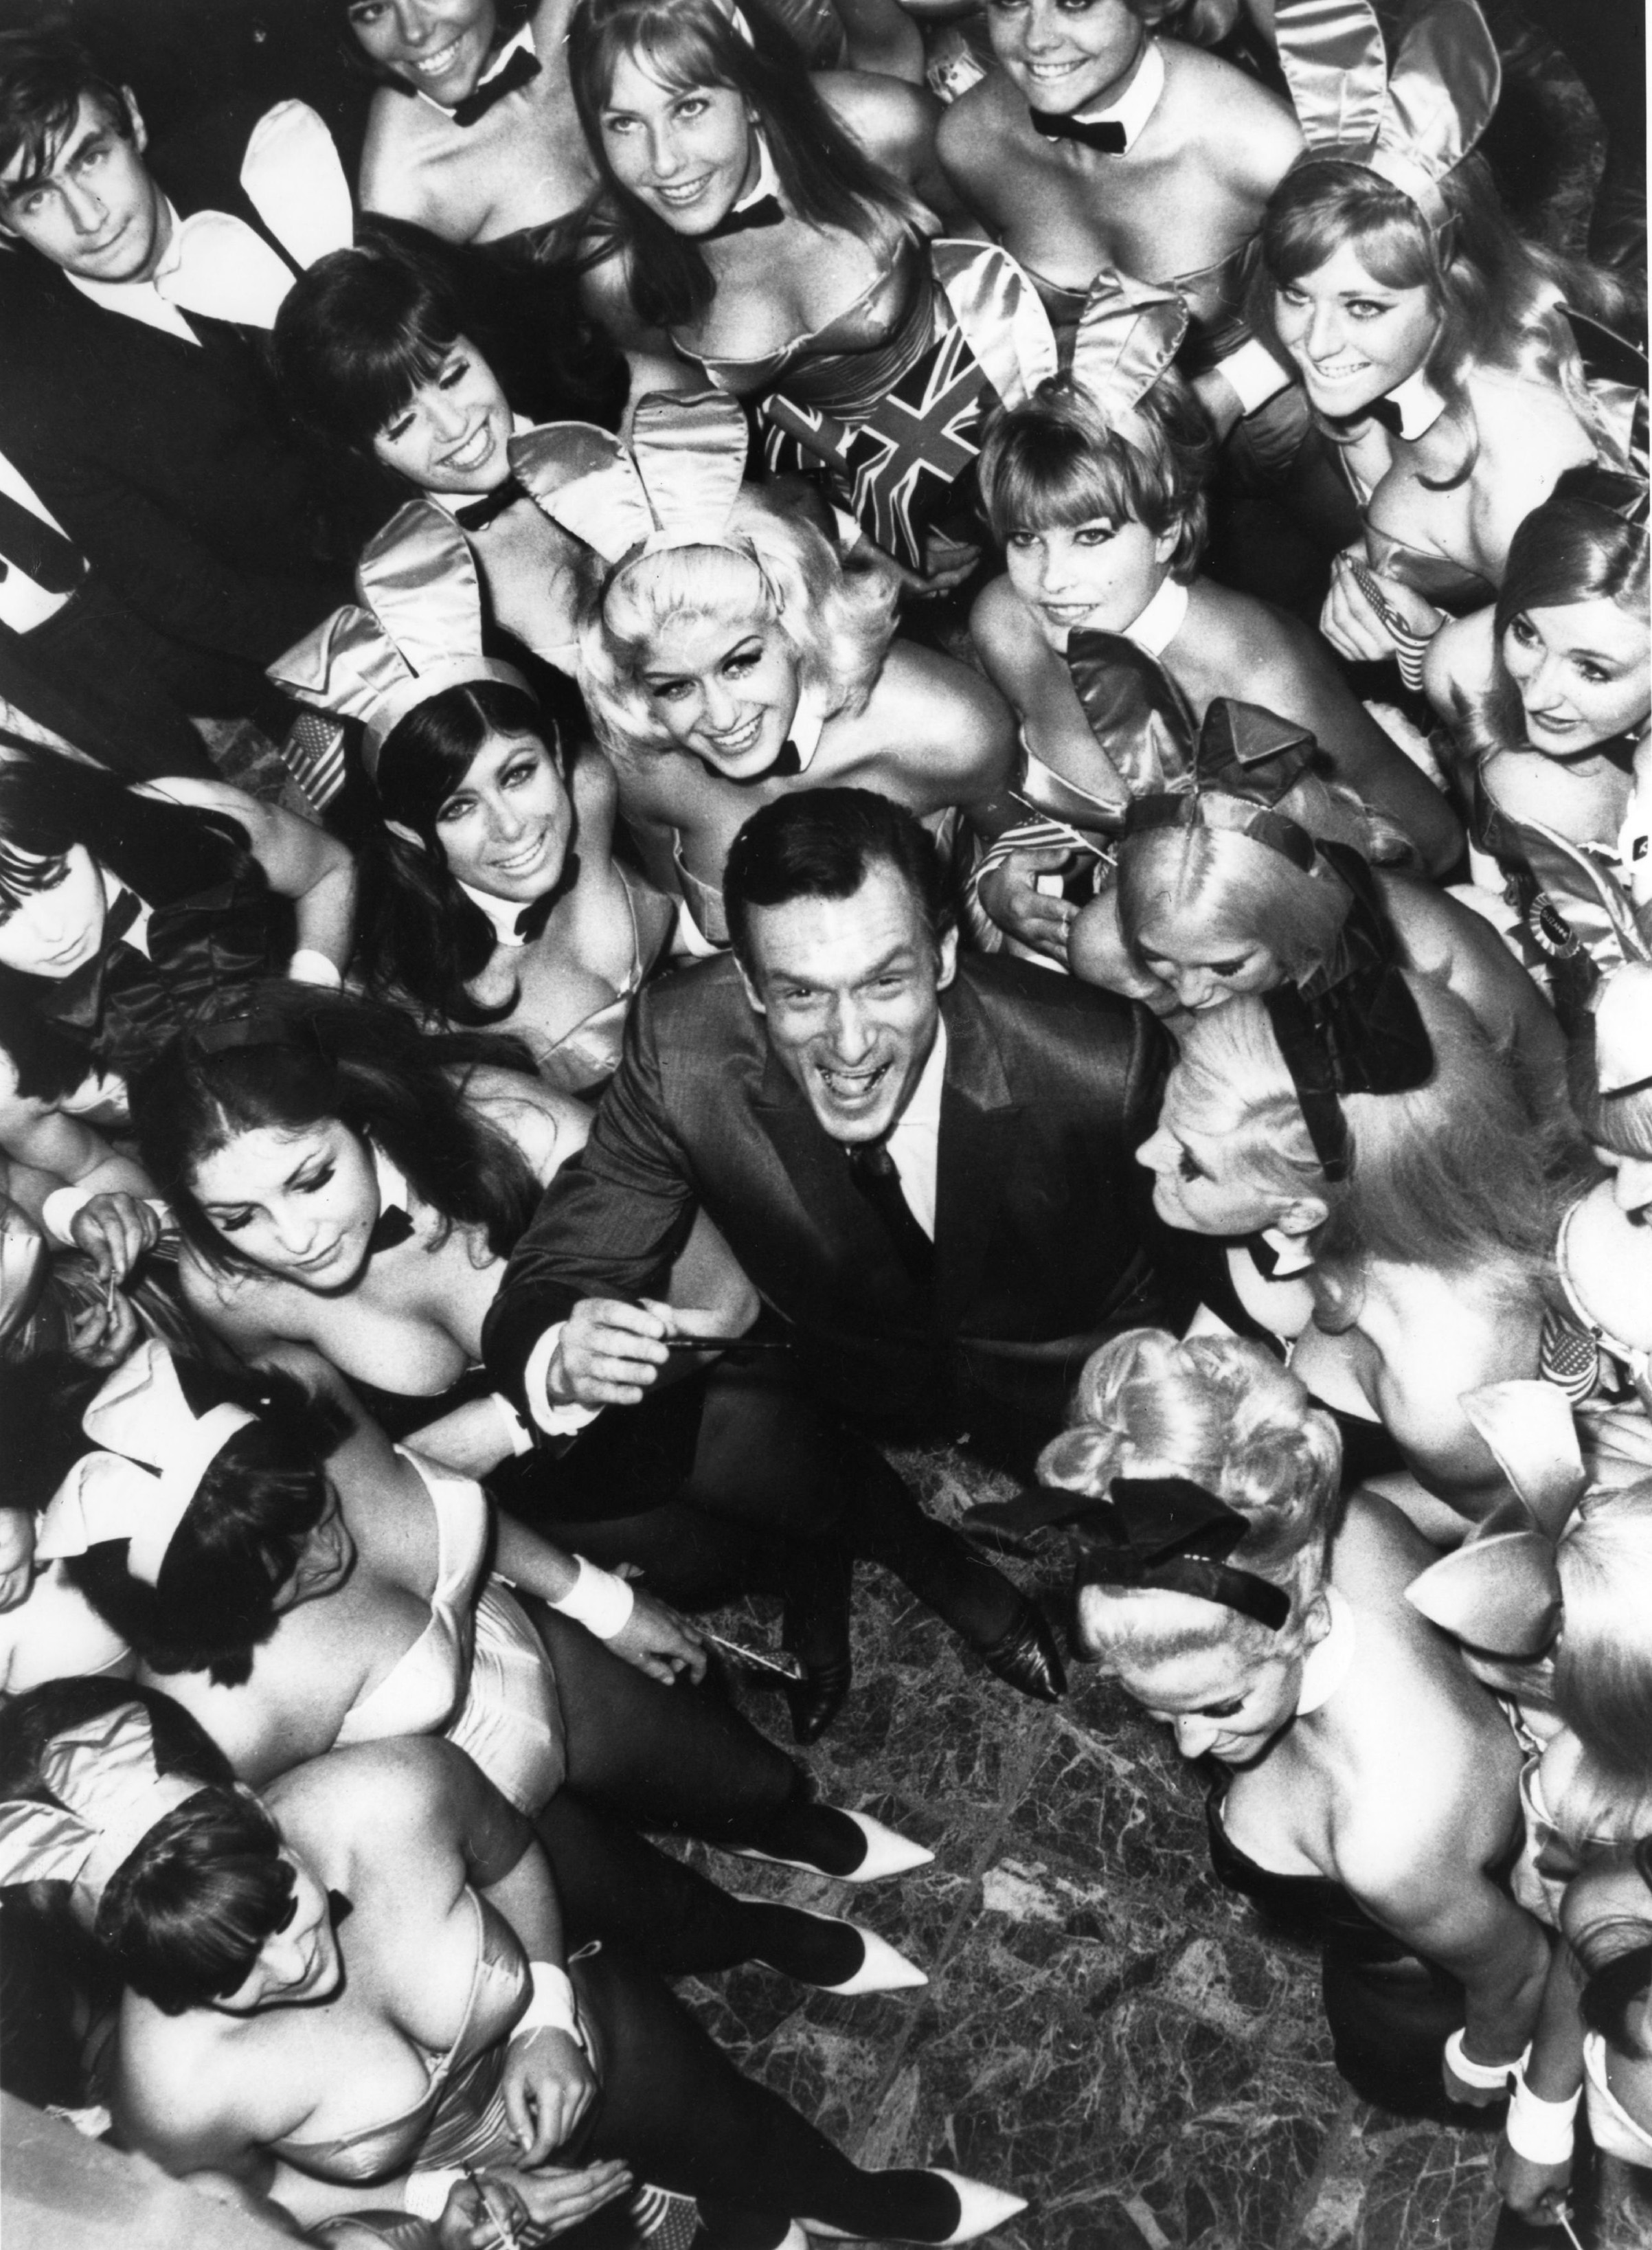 Hugh Hefner pictured surrounded by 50 Bunnies on June 27, 1966. (Keystone-France/Gamma-Keystone/Getty Images)